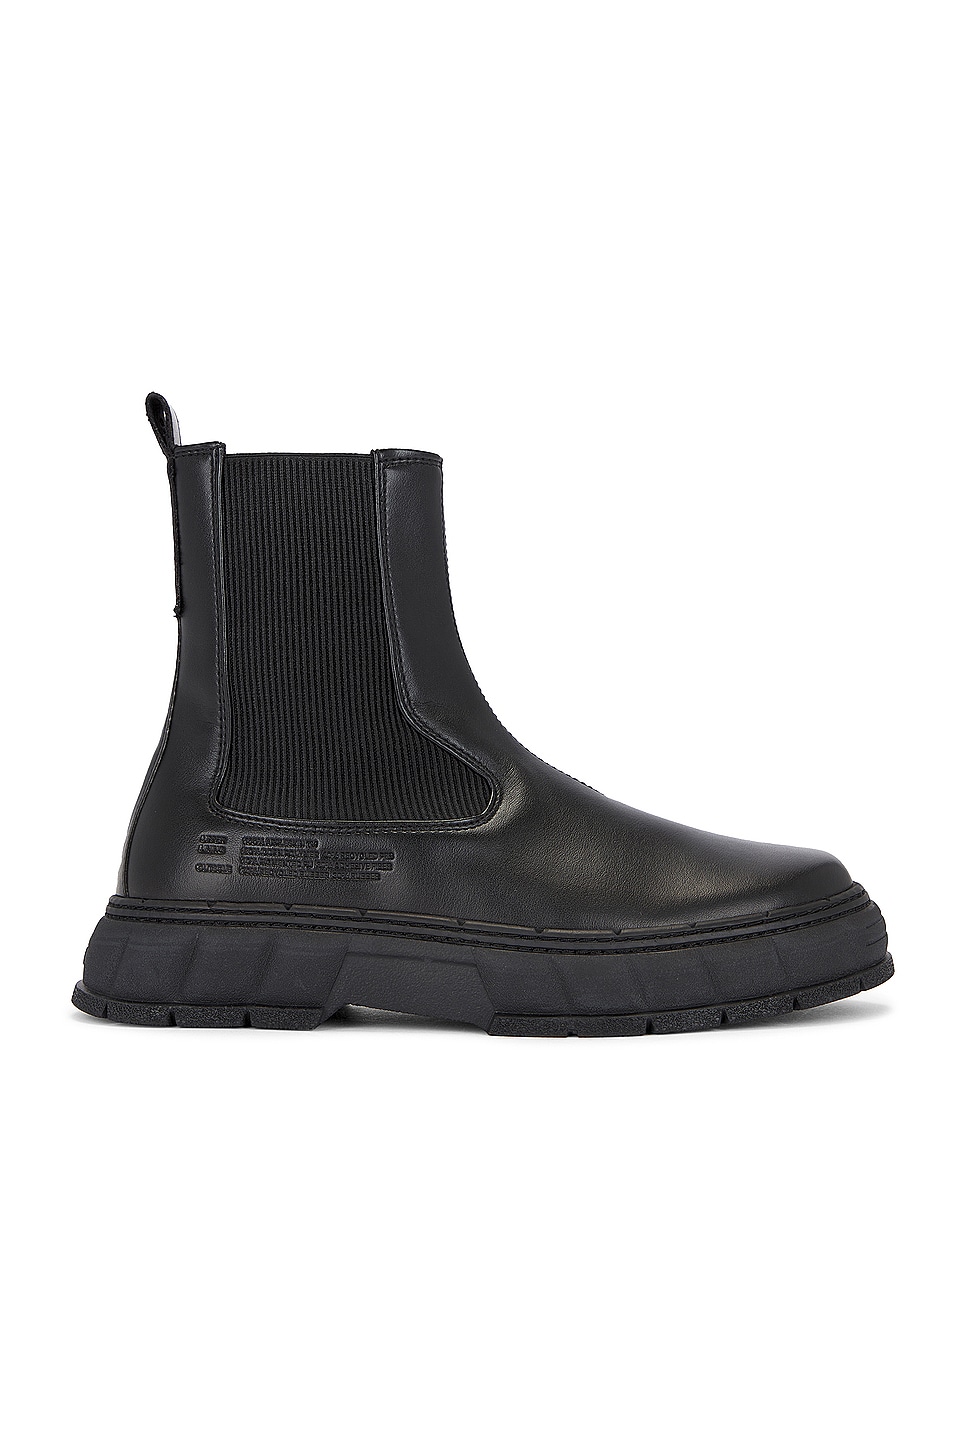 Image 1 of Viron Chelsea Boot in Black